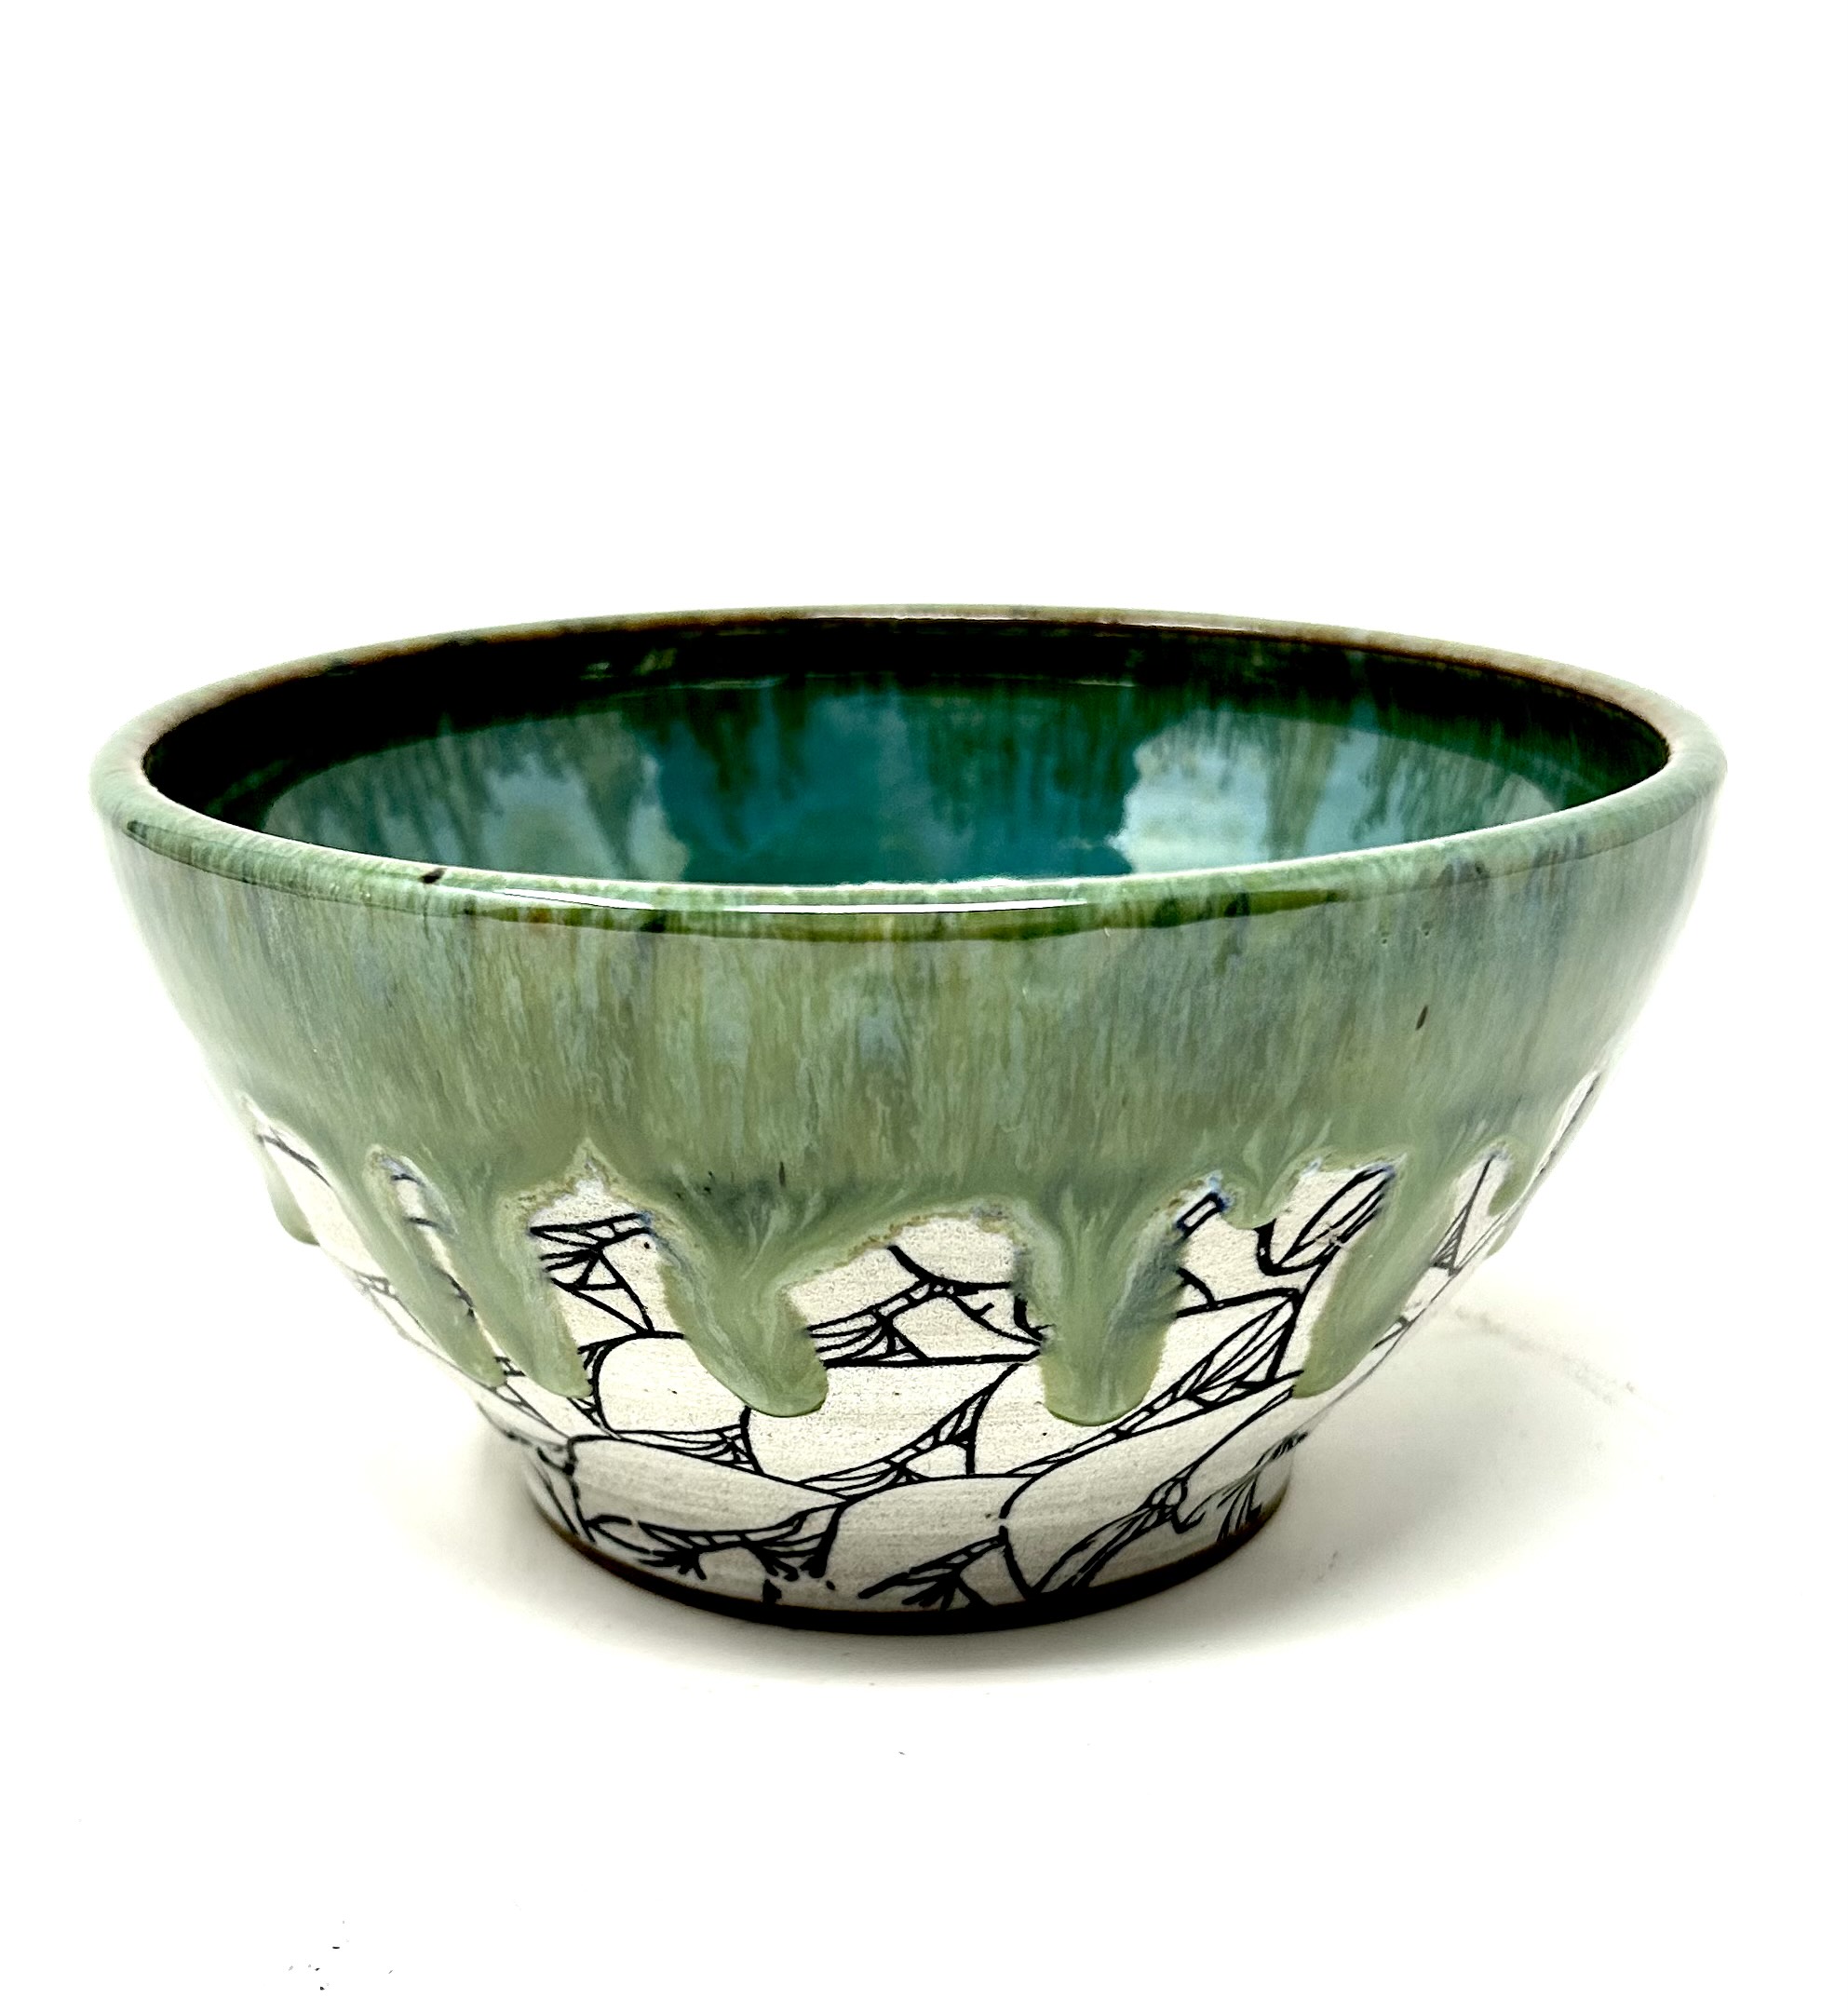 This Mossy Mushroom Bowl is a crafted stoneware piece that marries the earthiness of the forest floor with the ethereal quality of morning mist. The hand-etched mushrooms around the base are set against the natural backdrop of speckled clay, giving way to a verdant glaze that seems to drip over the edges like dew on lush foliage.